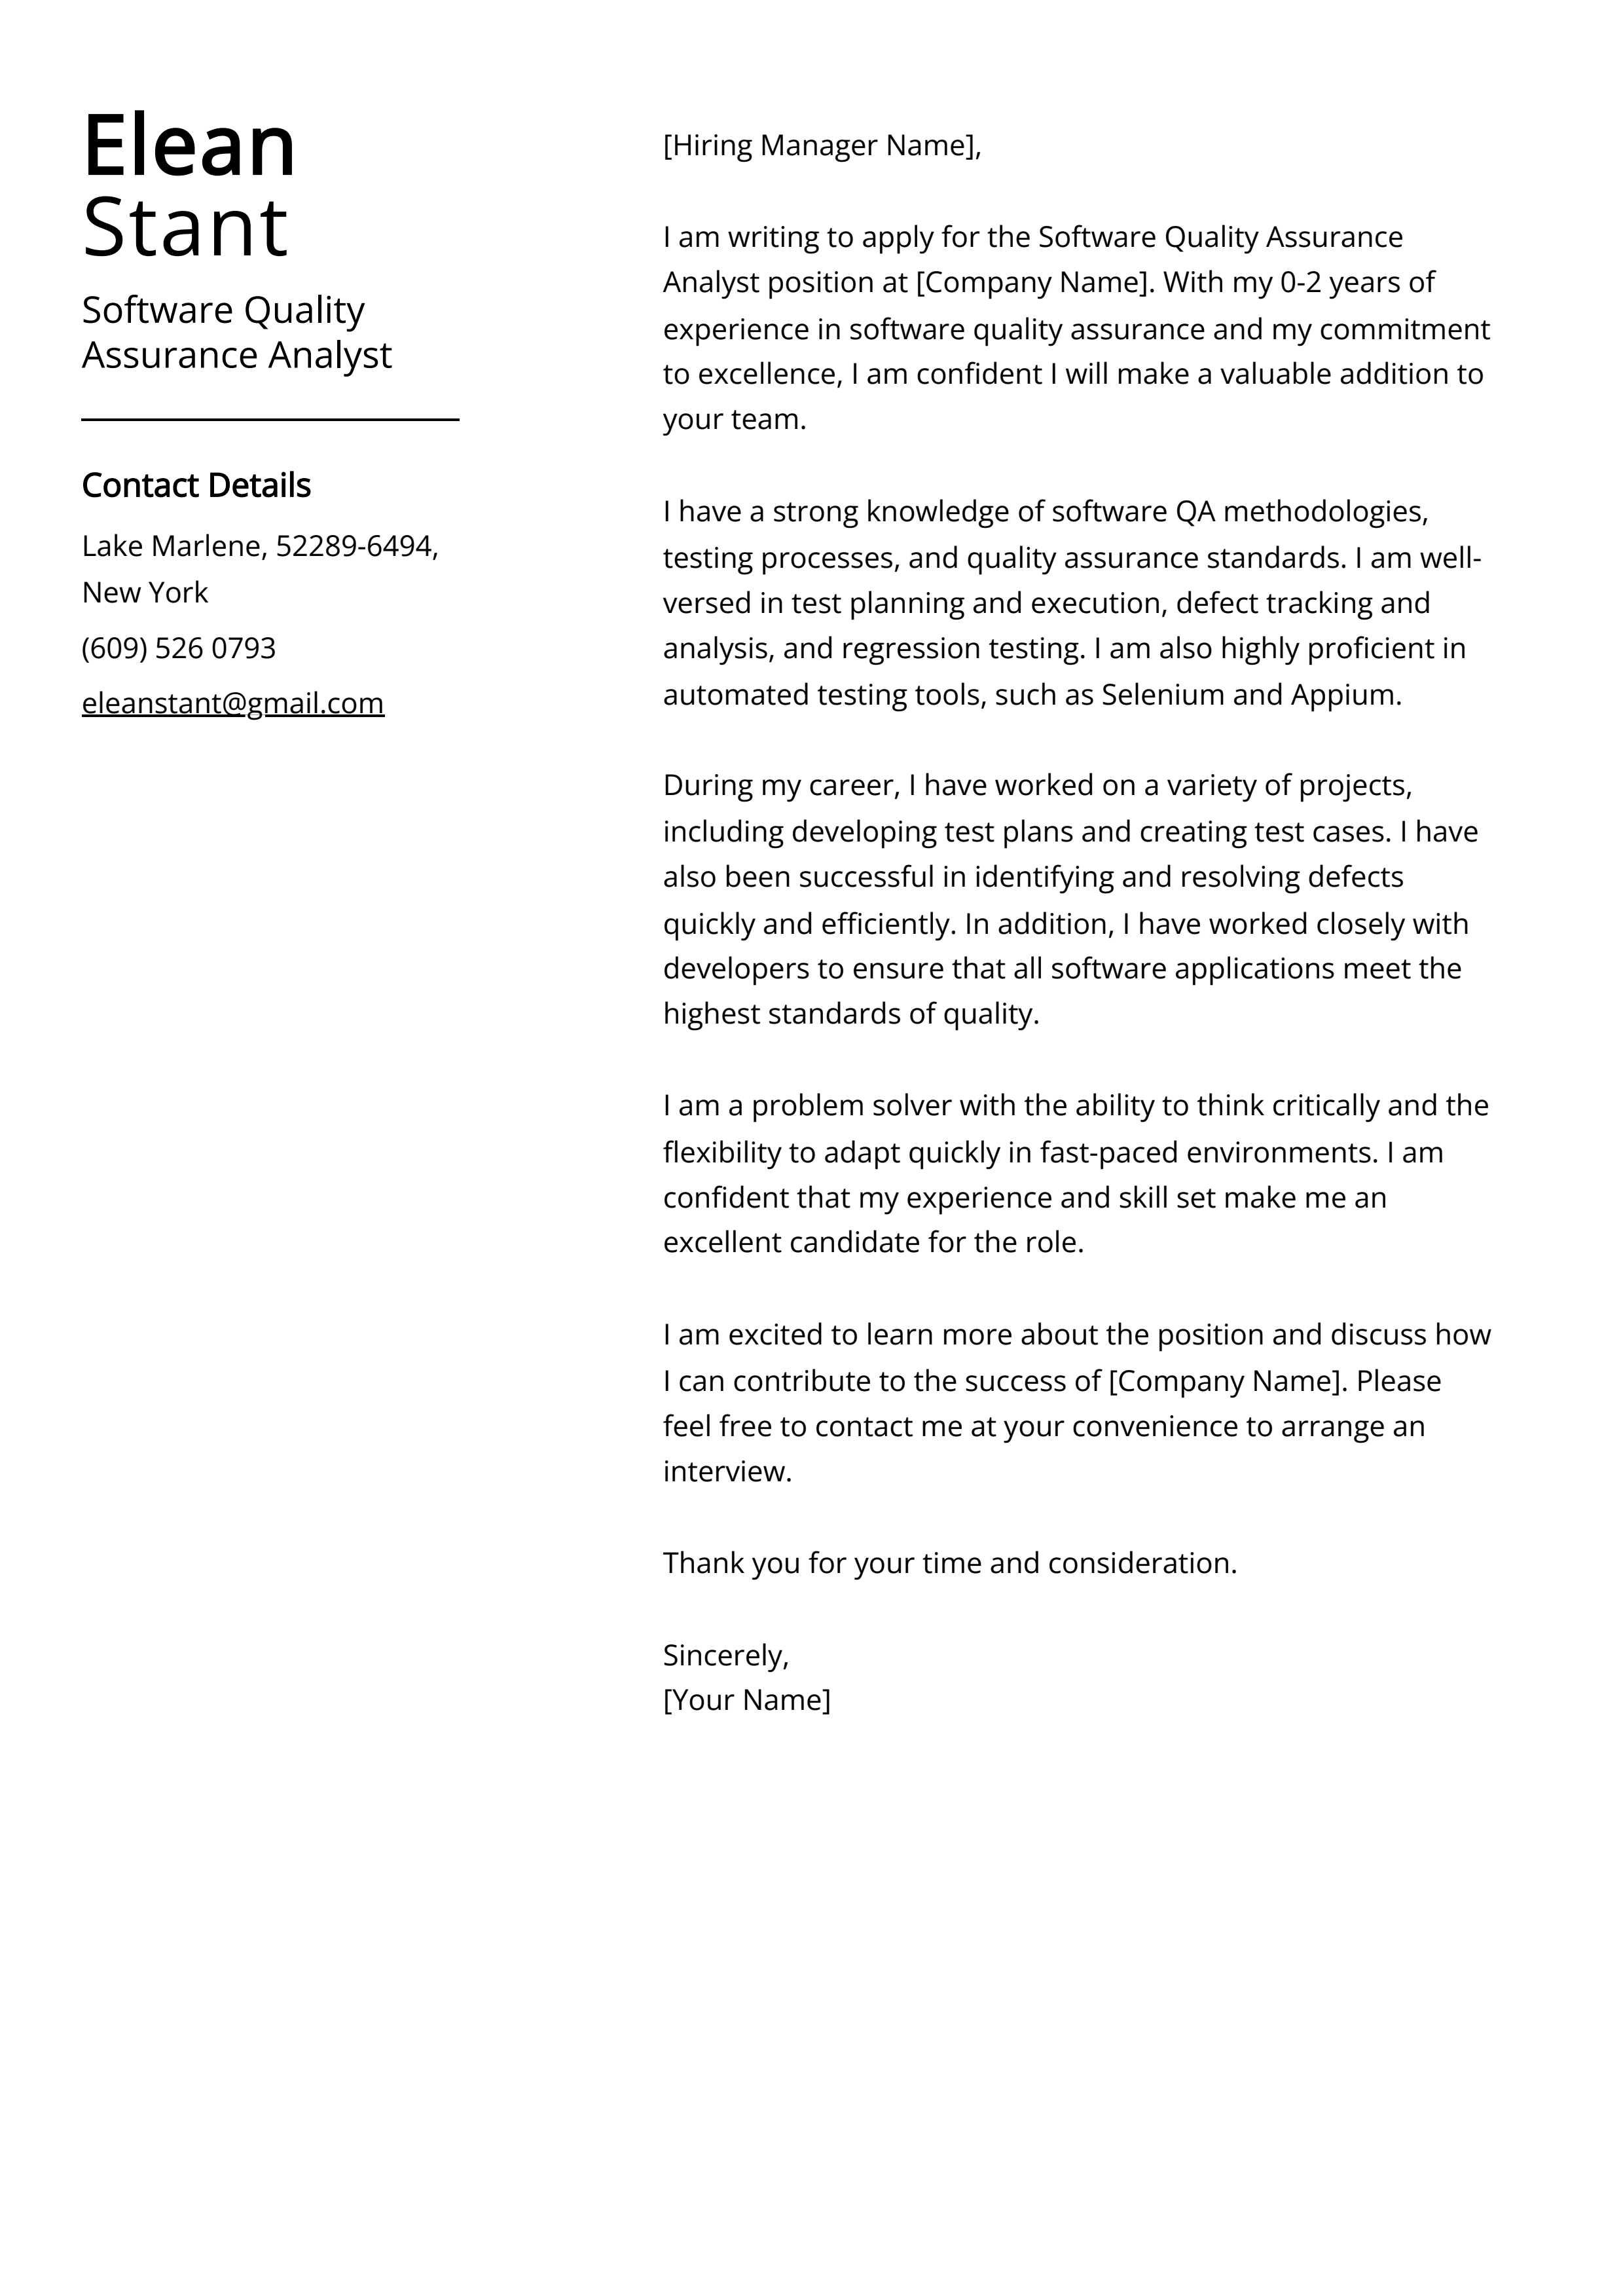 Software Quality Assurance Analyst Cover Letter Example